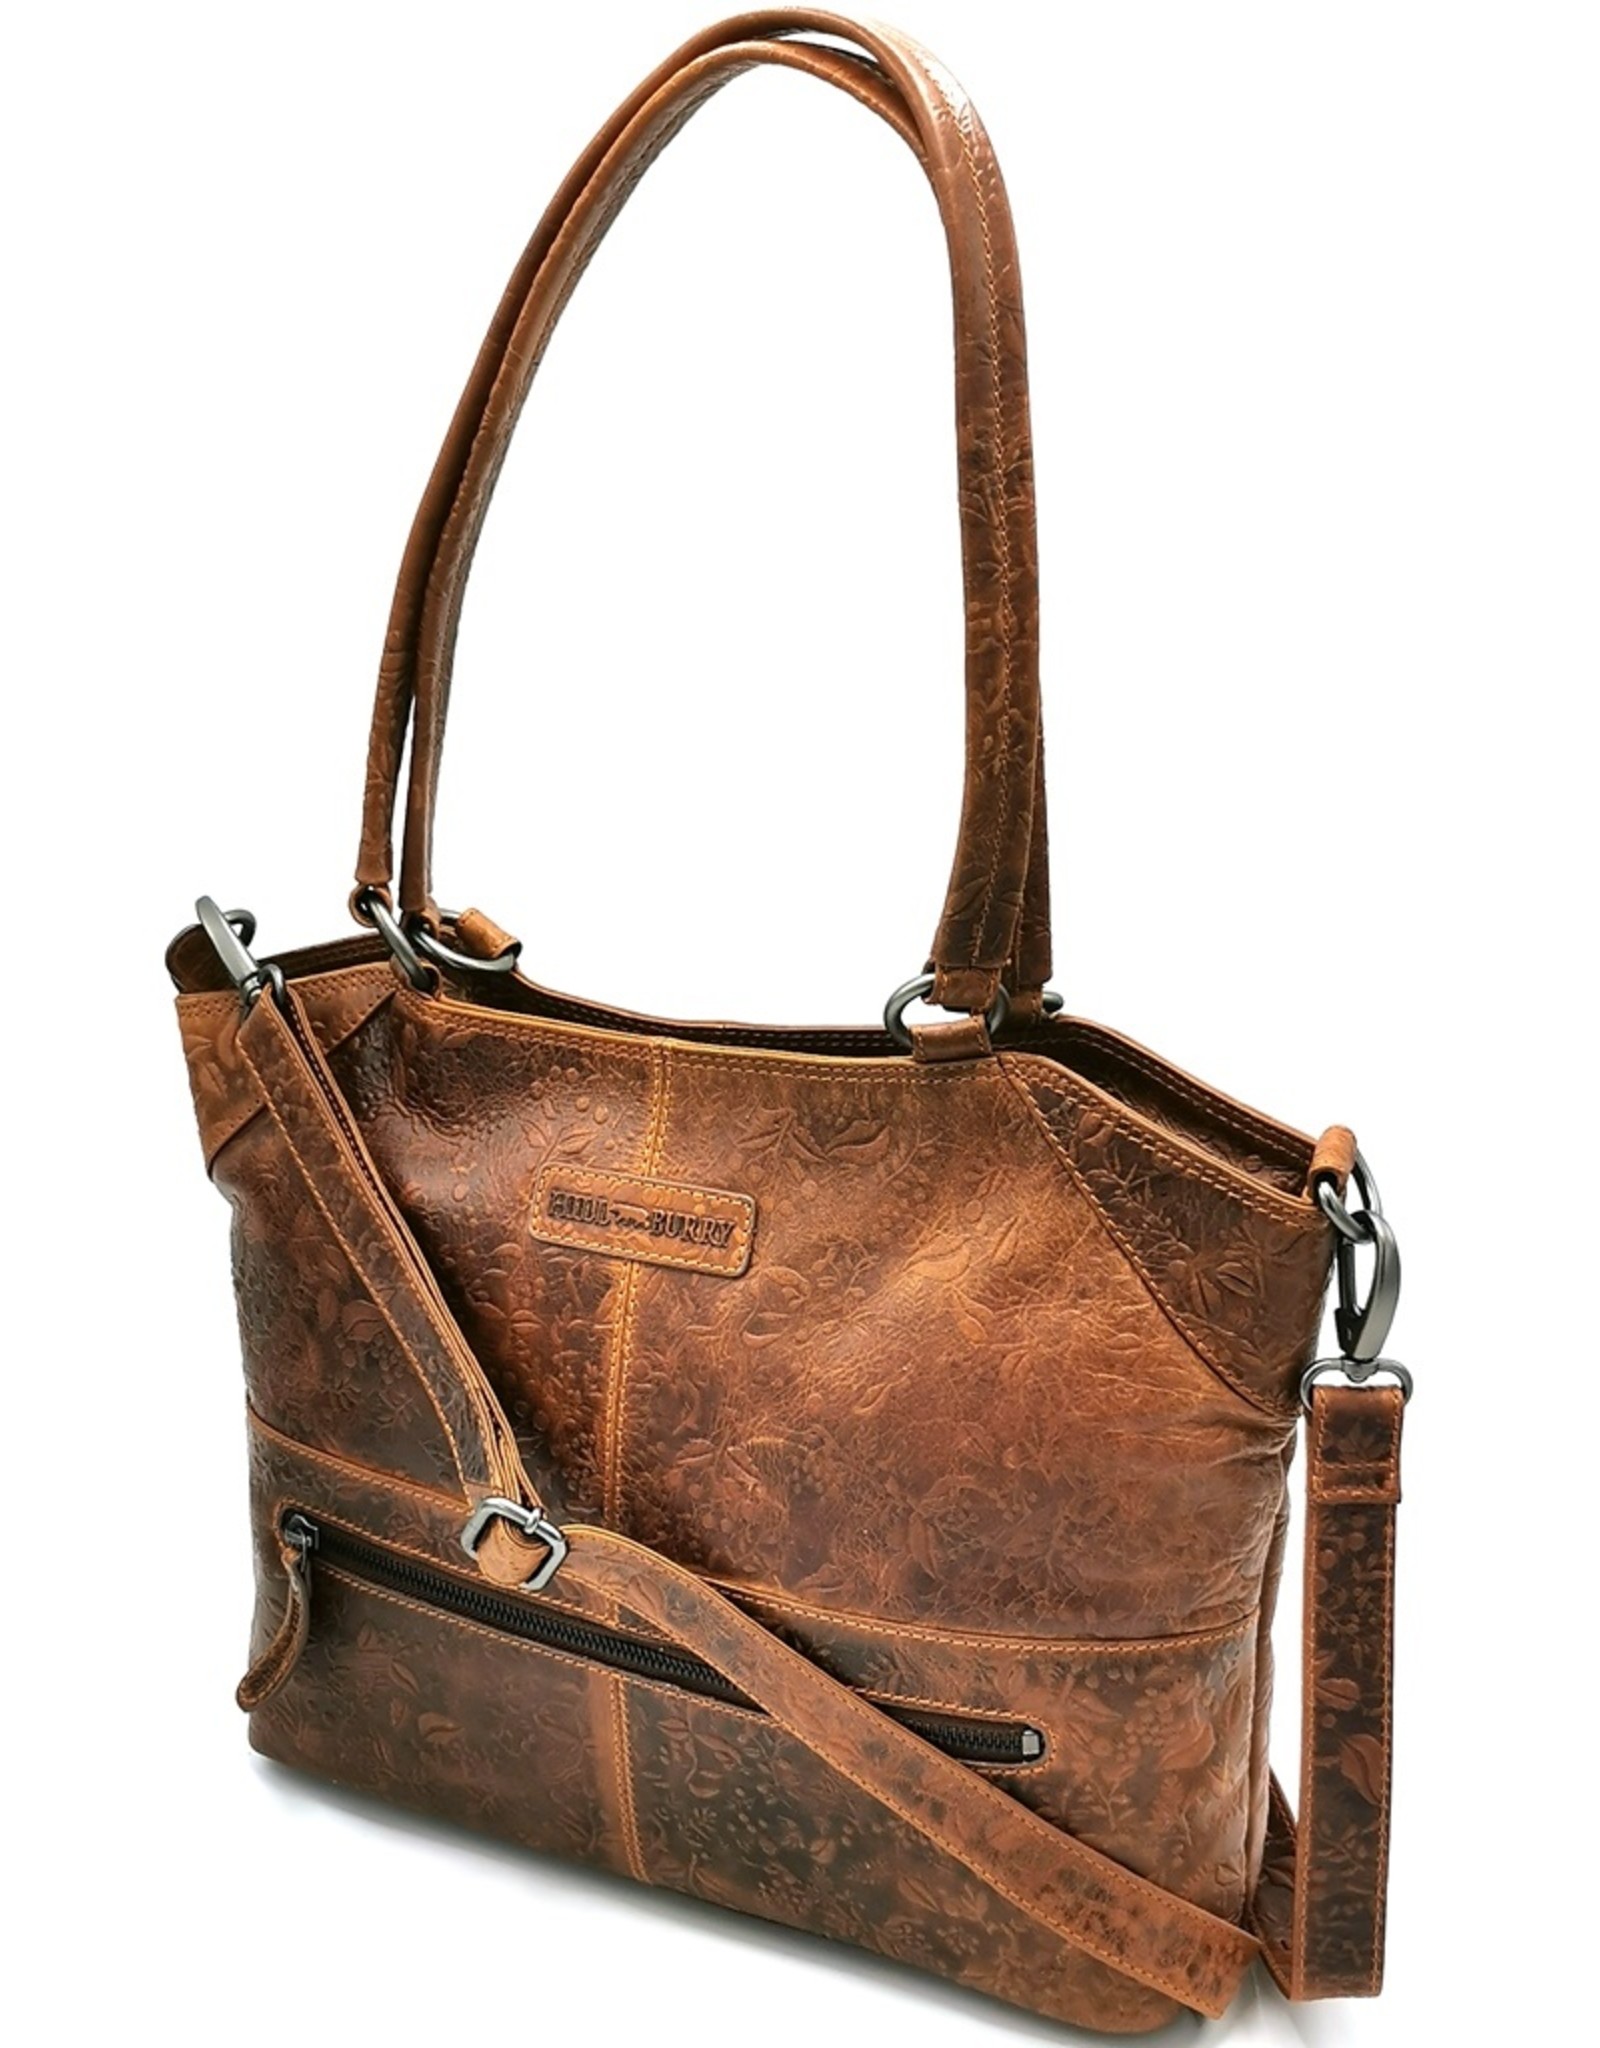 HillBurry Leather bags - Leather Hillburry Shopper with Flower Embossing and Long Double Handles